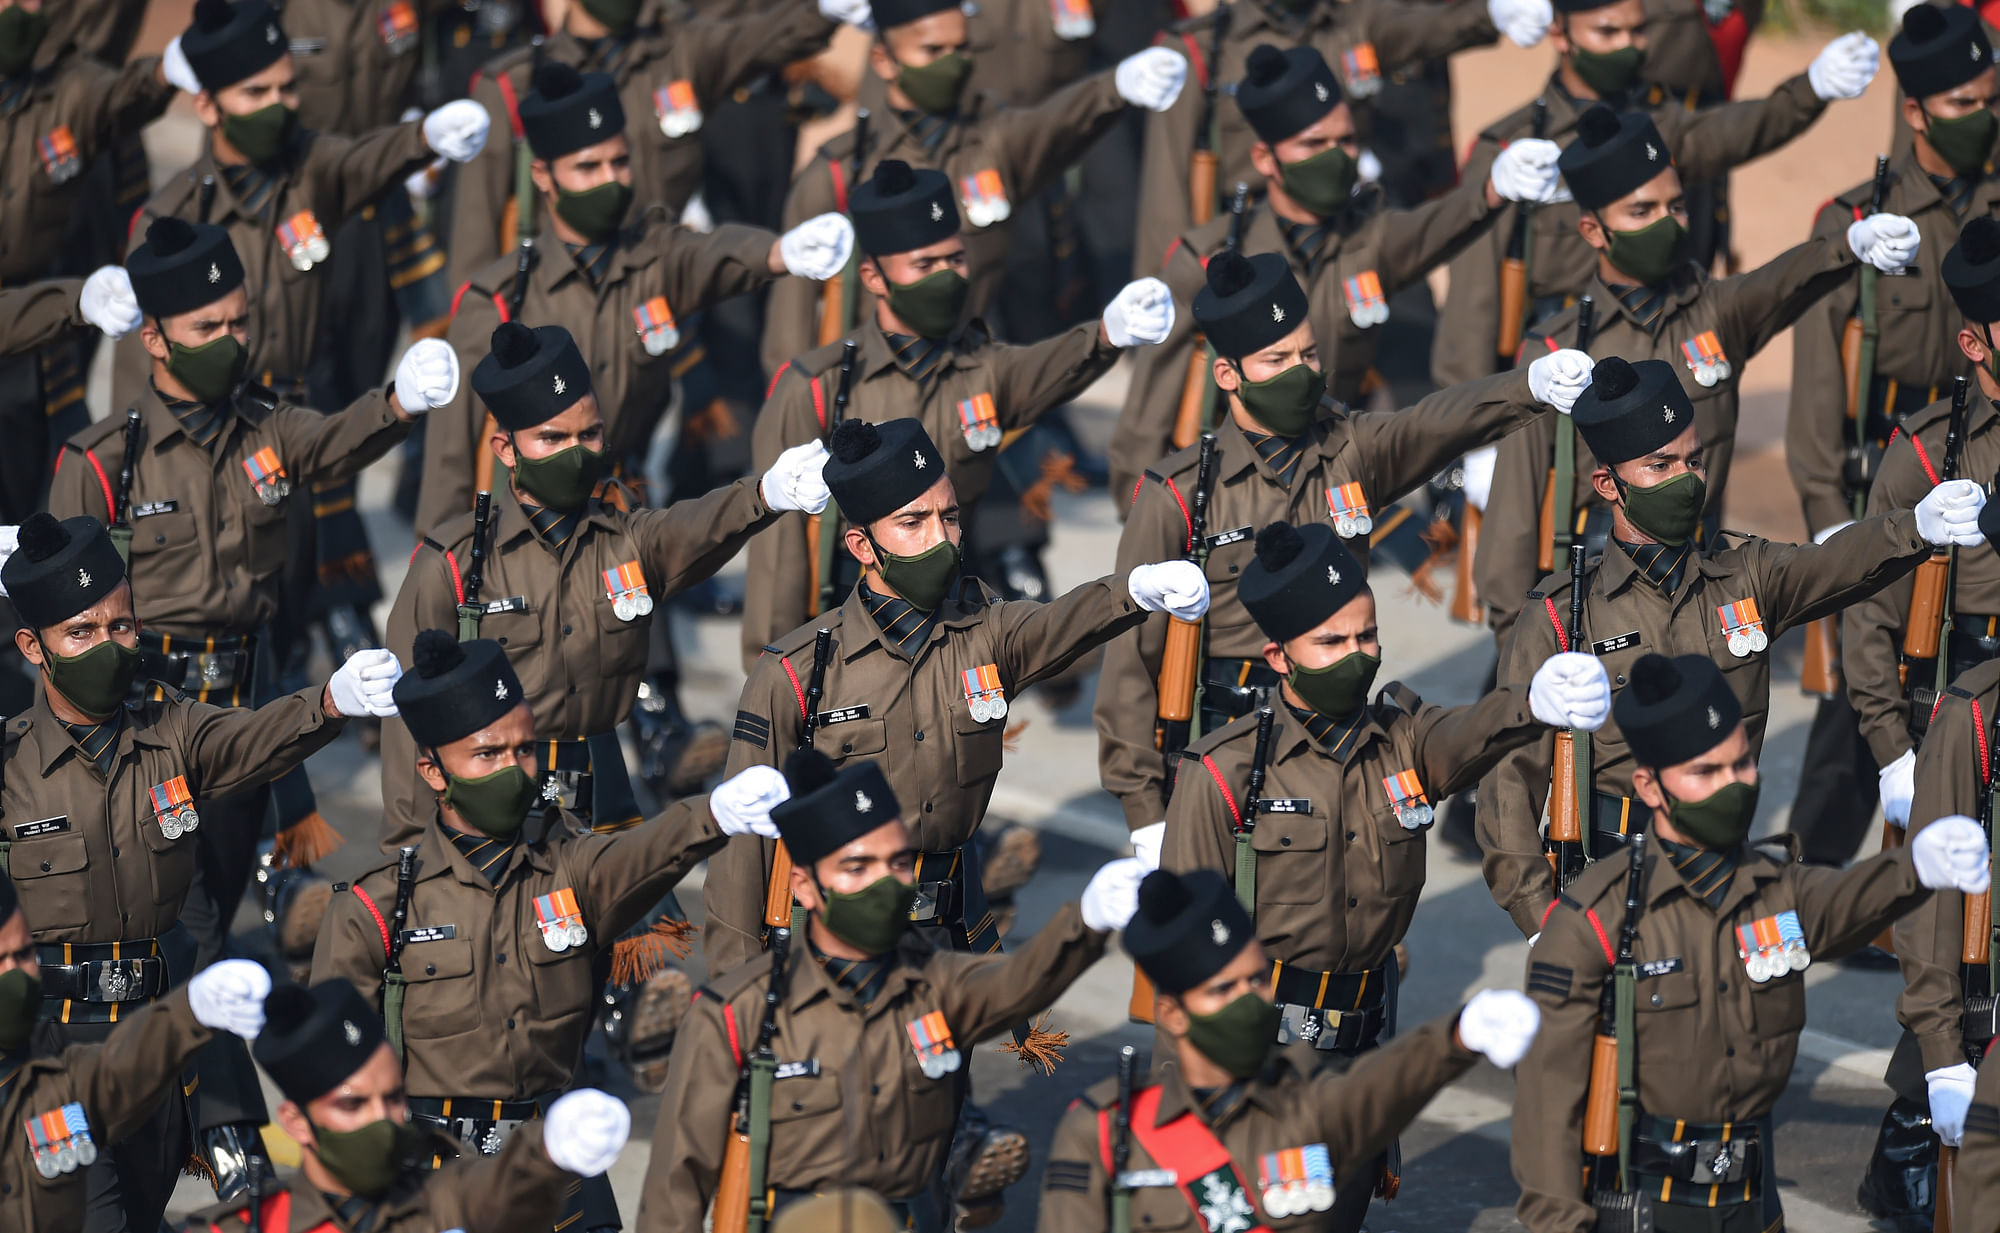 New Delhi: Members of Garhwal rifles contingent pass through Rajpath during the 72nd Republic Day celebrations, in New Delhi, Tuesday, Jan. 26, 2021.